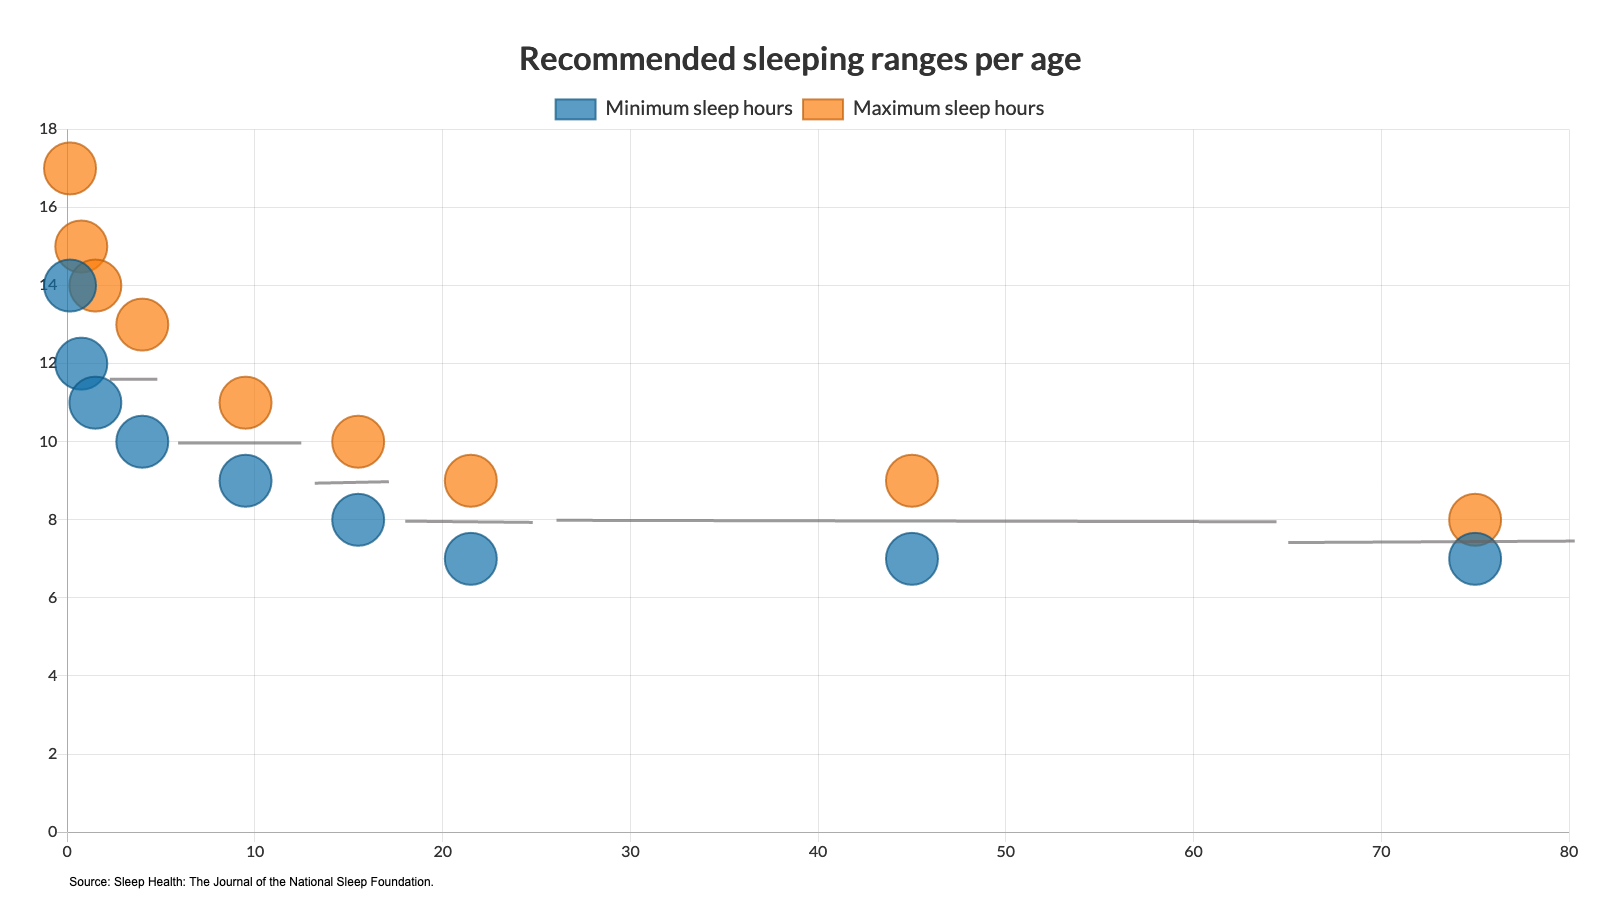 Scatter - Recommended sleeping ranges per age